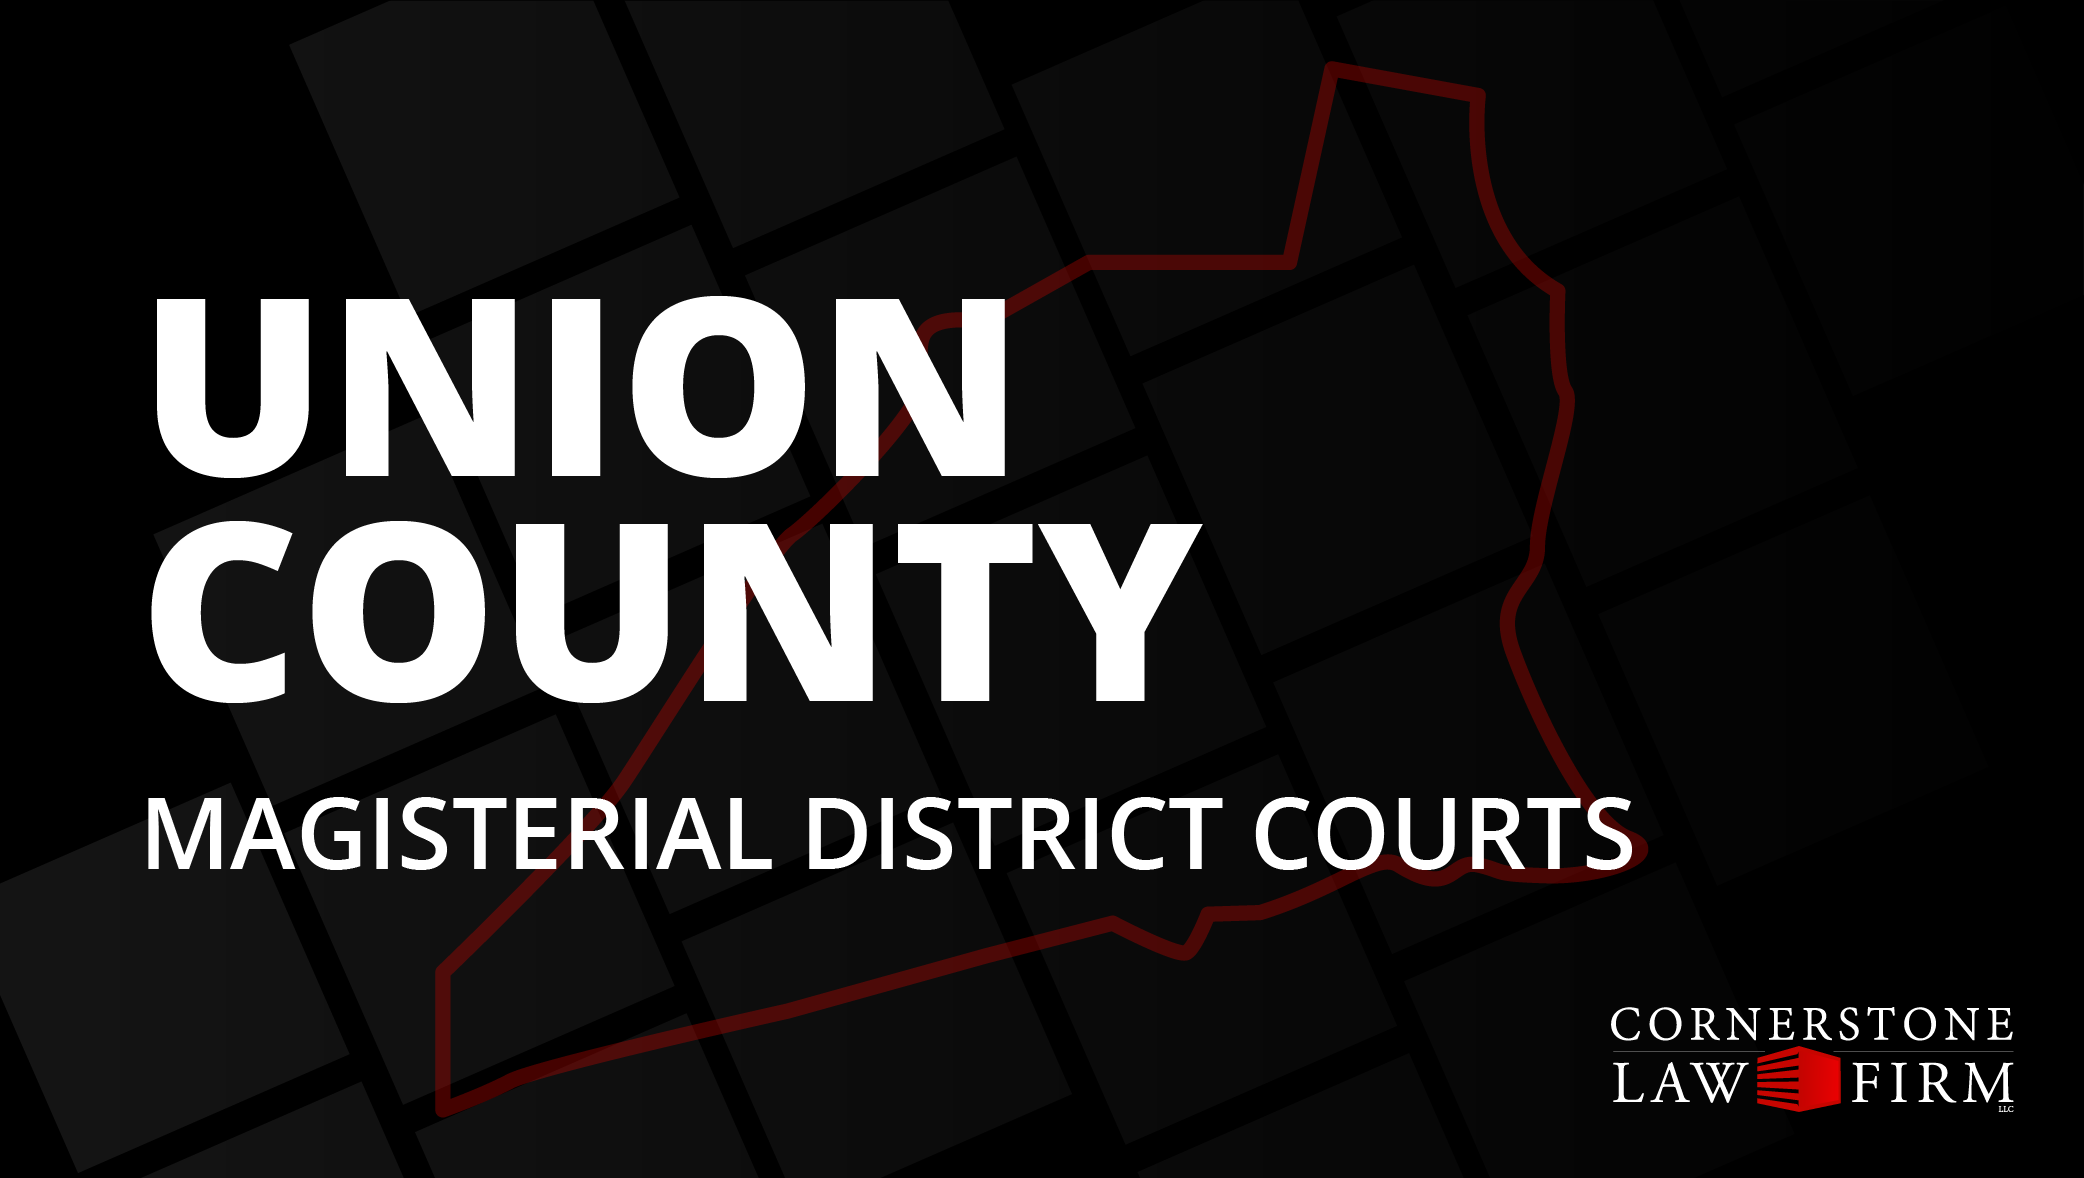 The words "Union County Magisterial District Courts" over a black background with a faded red outline of the county.